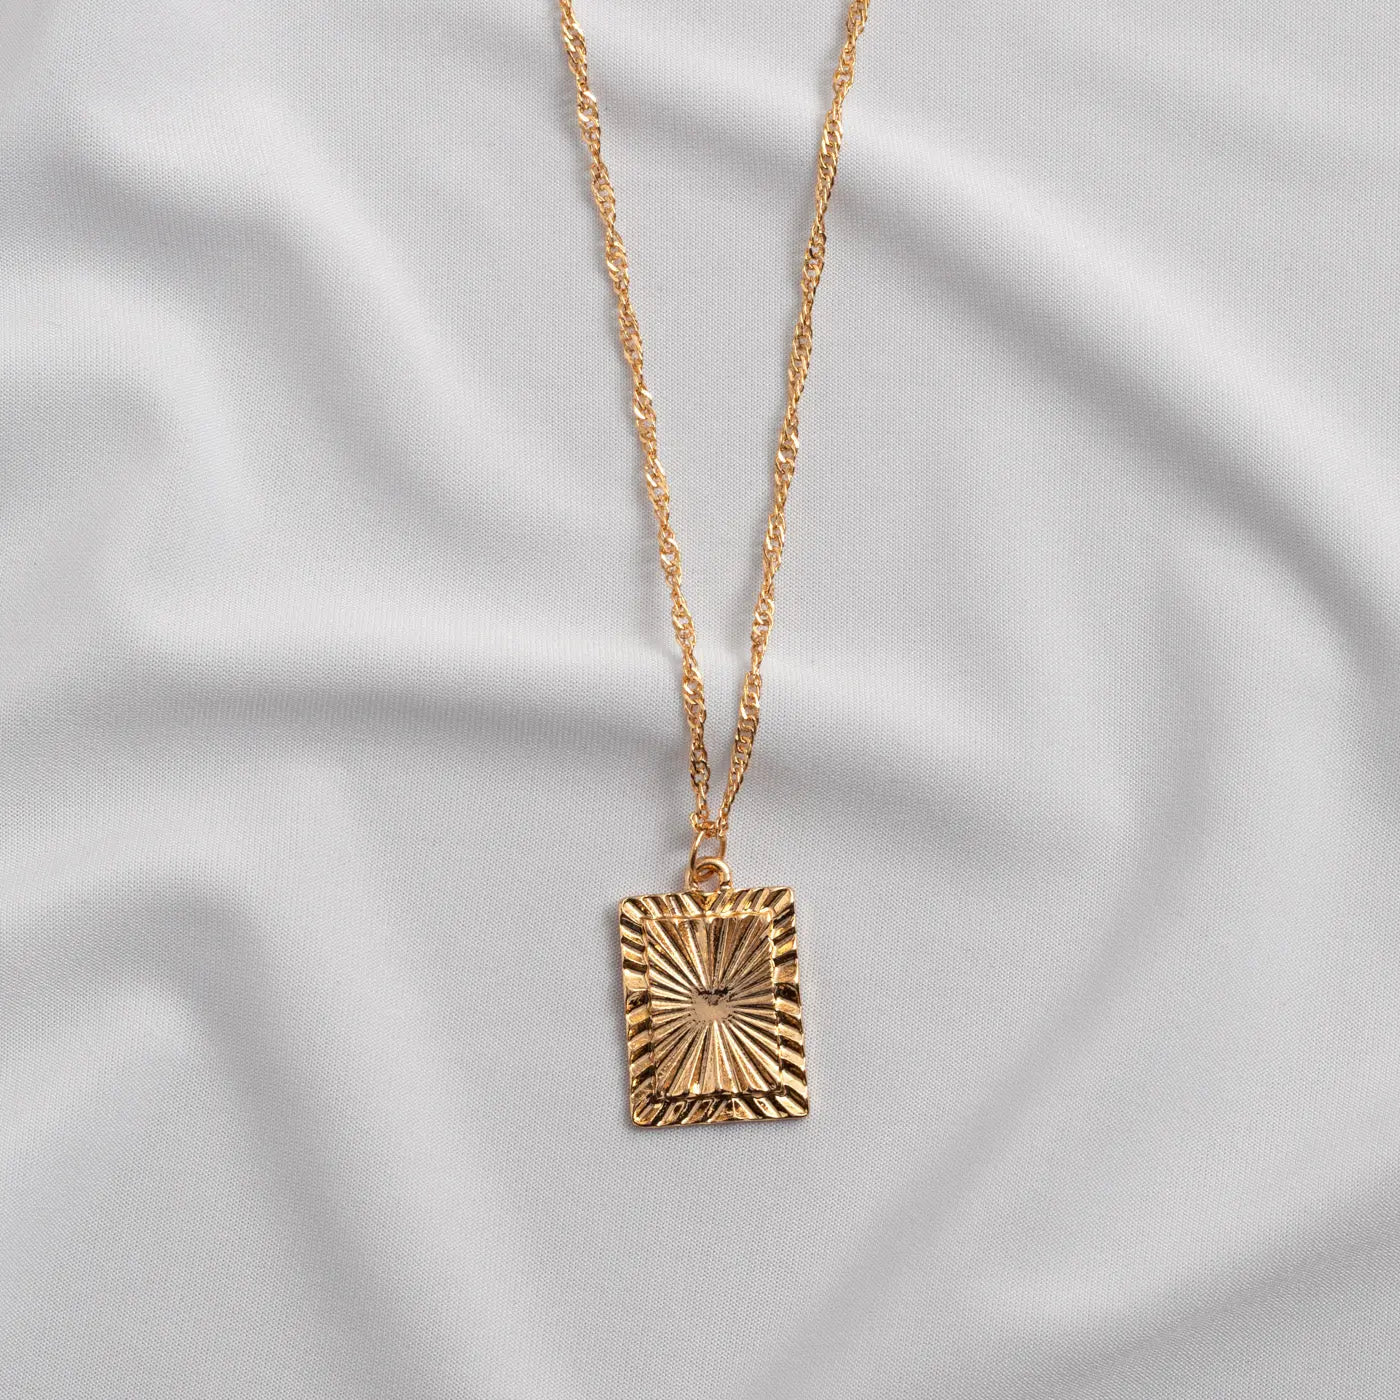 Lana - Rays Square Plate Necklace